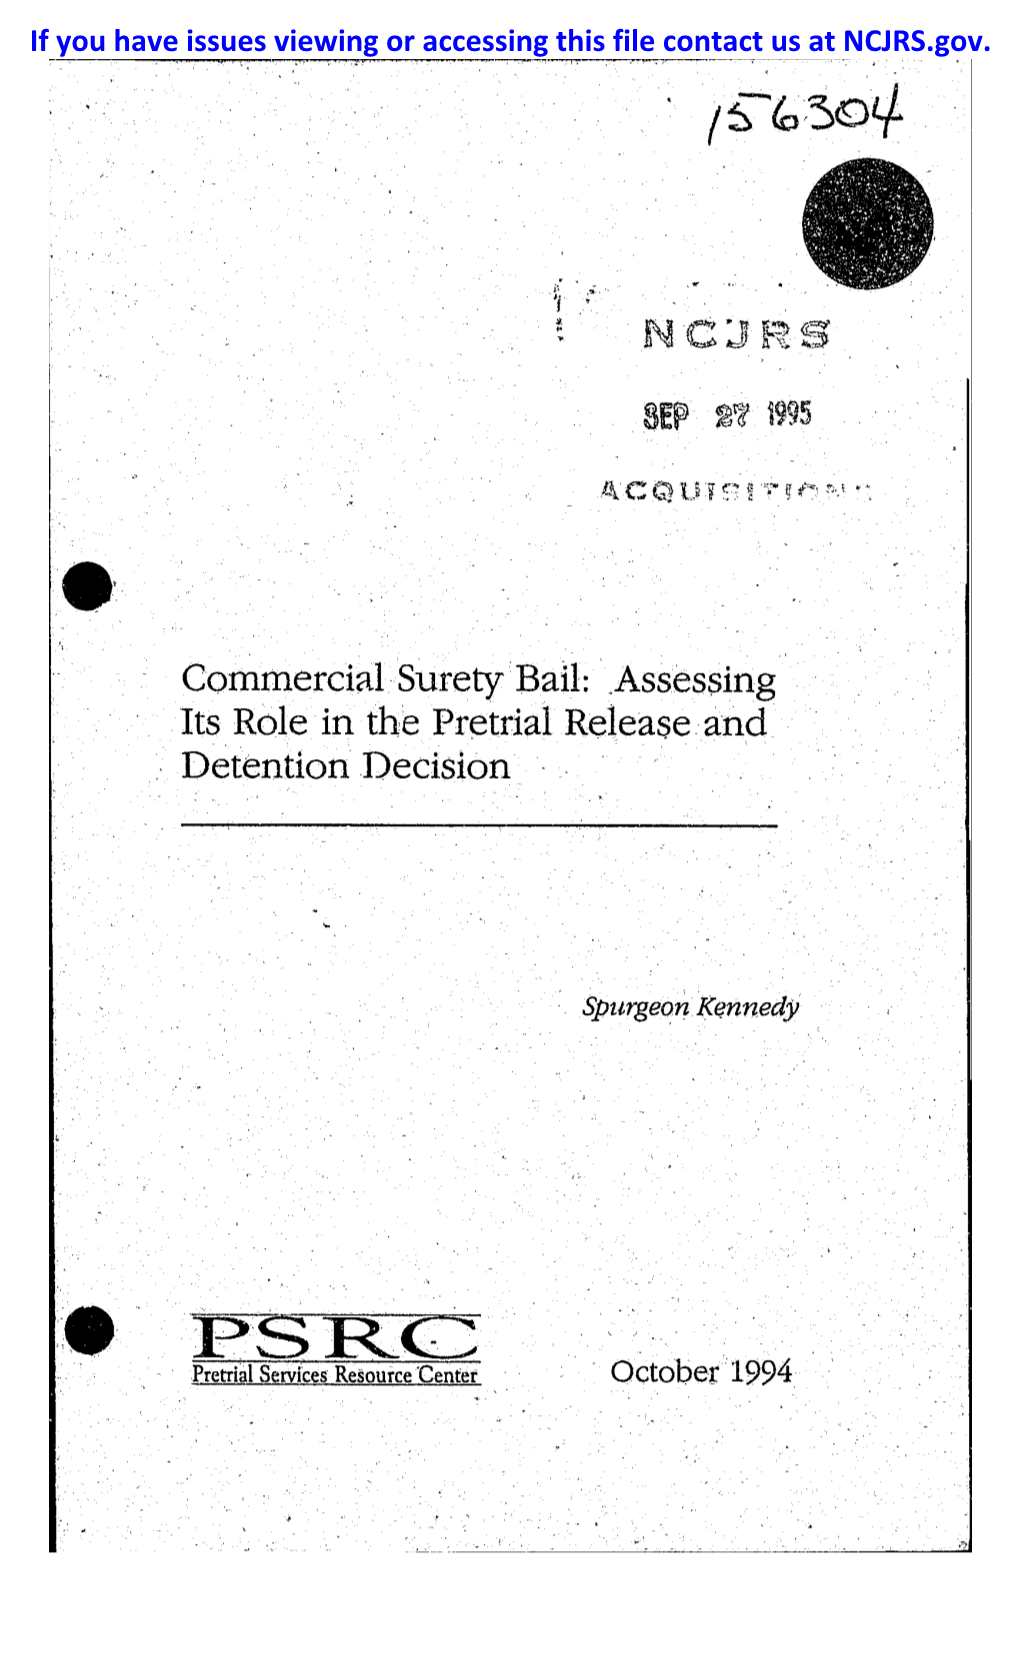 Commercial Surety Bail: .Assessing Its Role in the Pretrial Release and Detention Decision